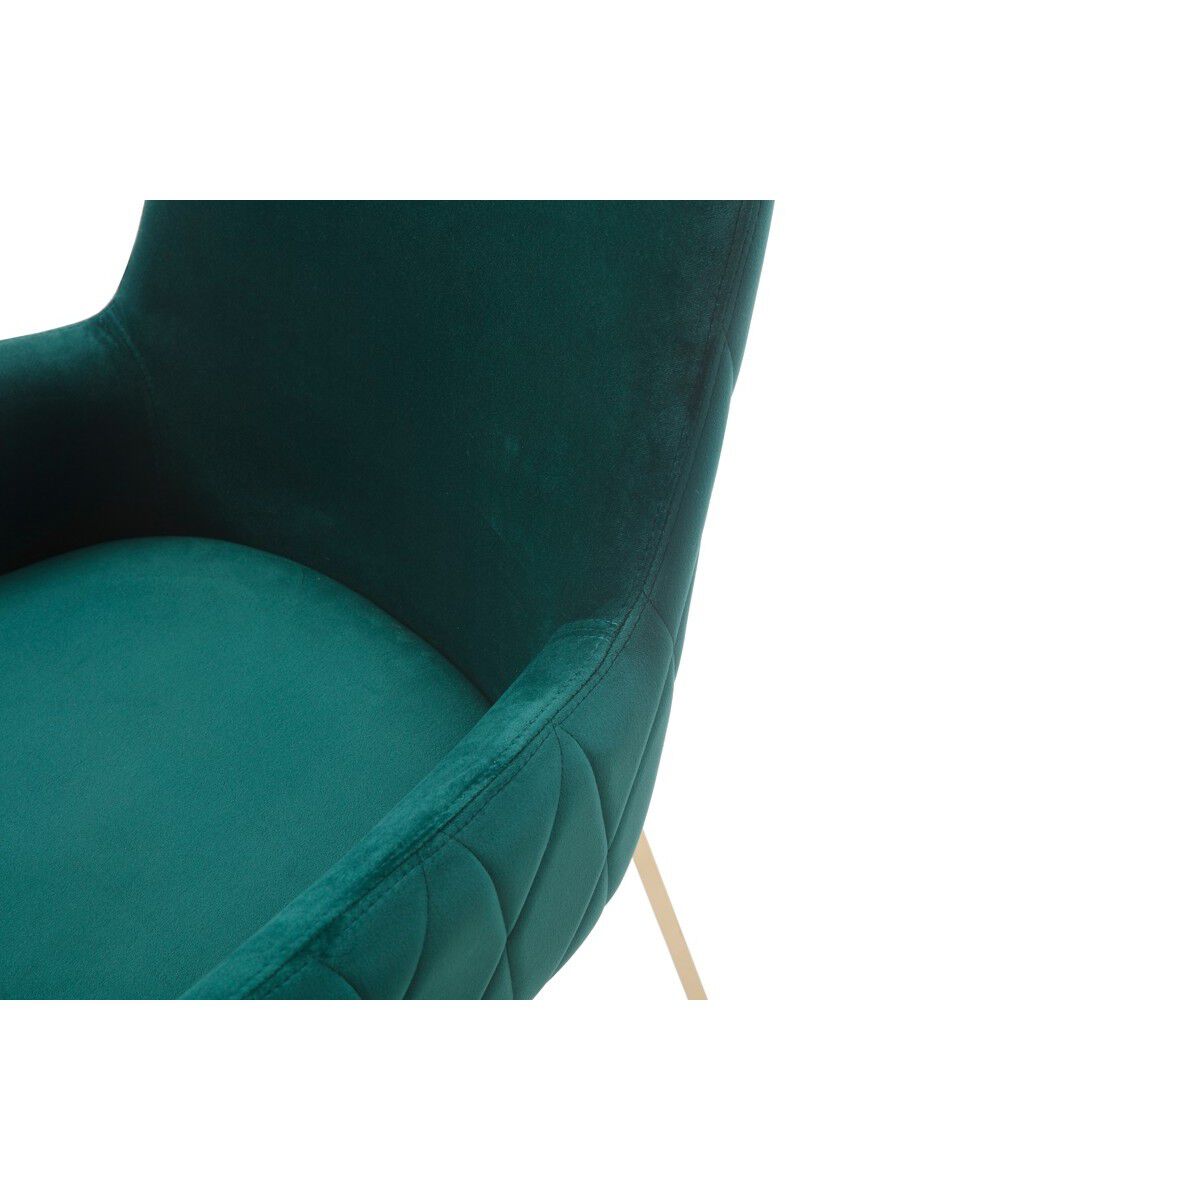 Fabric Upholstered Dining Chair with Straight Metal Legs, Green and Gold